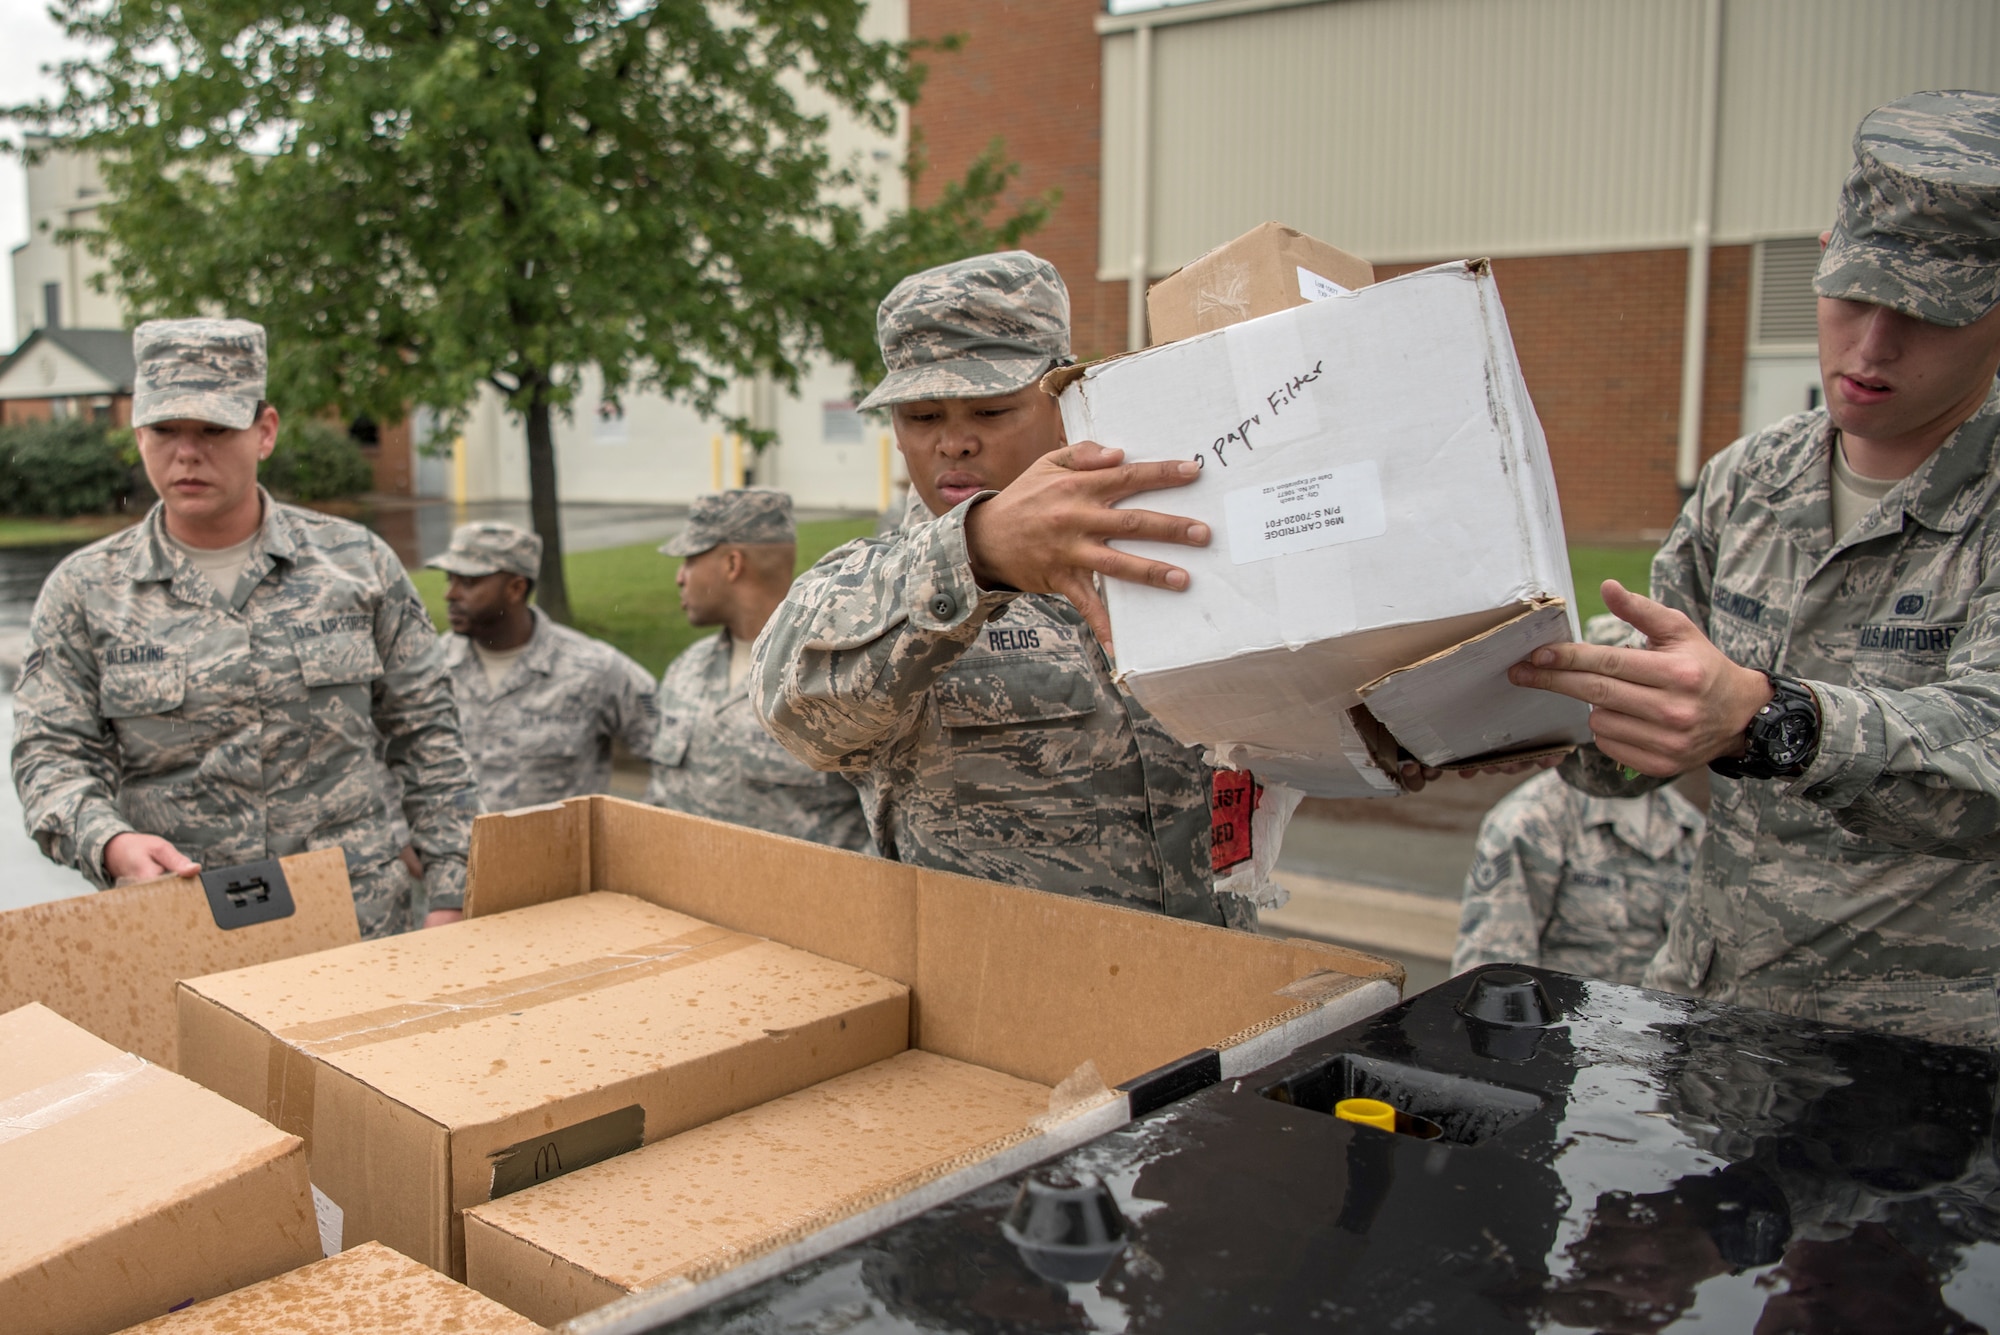 Members of the 123rd Airlift Wing’s Fatality Search and Recovery Team pack equipment at the Kentucky Air National Guard Base in Louisville, Ky., Sept. 17, 2018, prior to deploying to North Carolina to support operations in the wake of Hurricane Florence. The team, which specializes in the dignified recovery of deceased personnel, will assist the North Carolina medical examiner’s office at the request of local health officials.